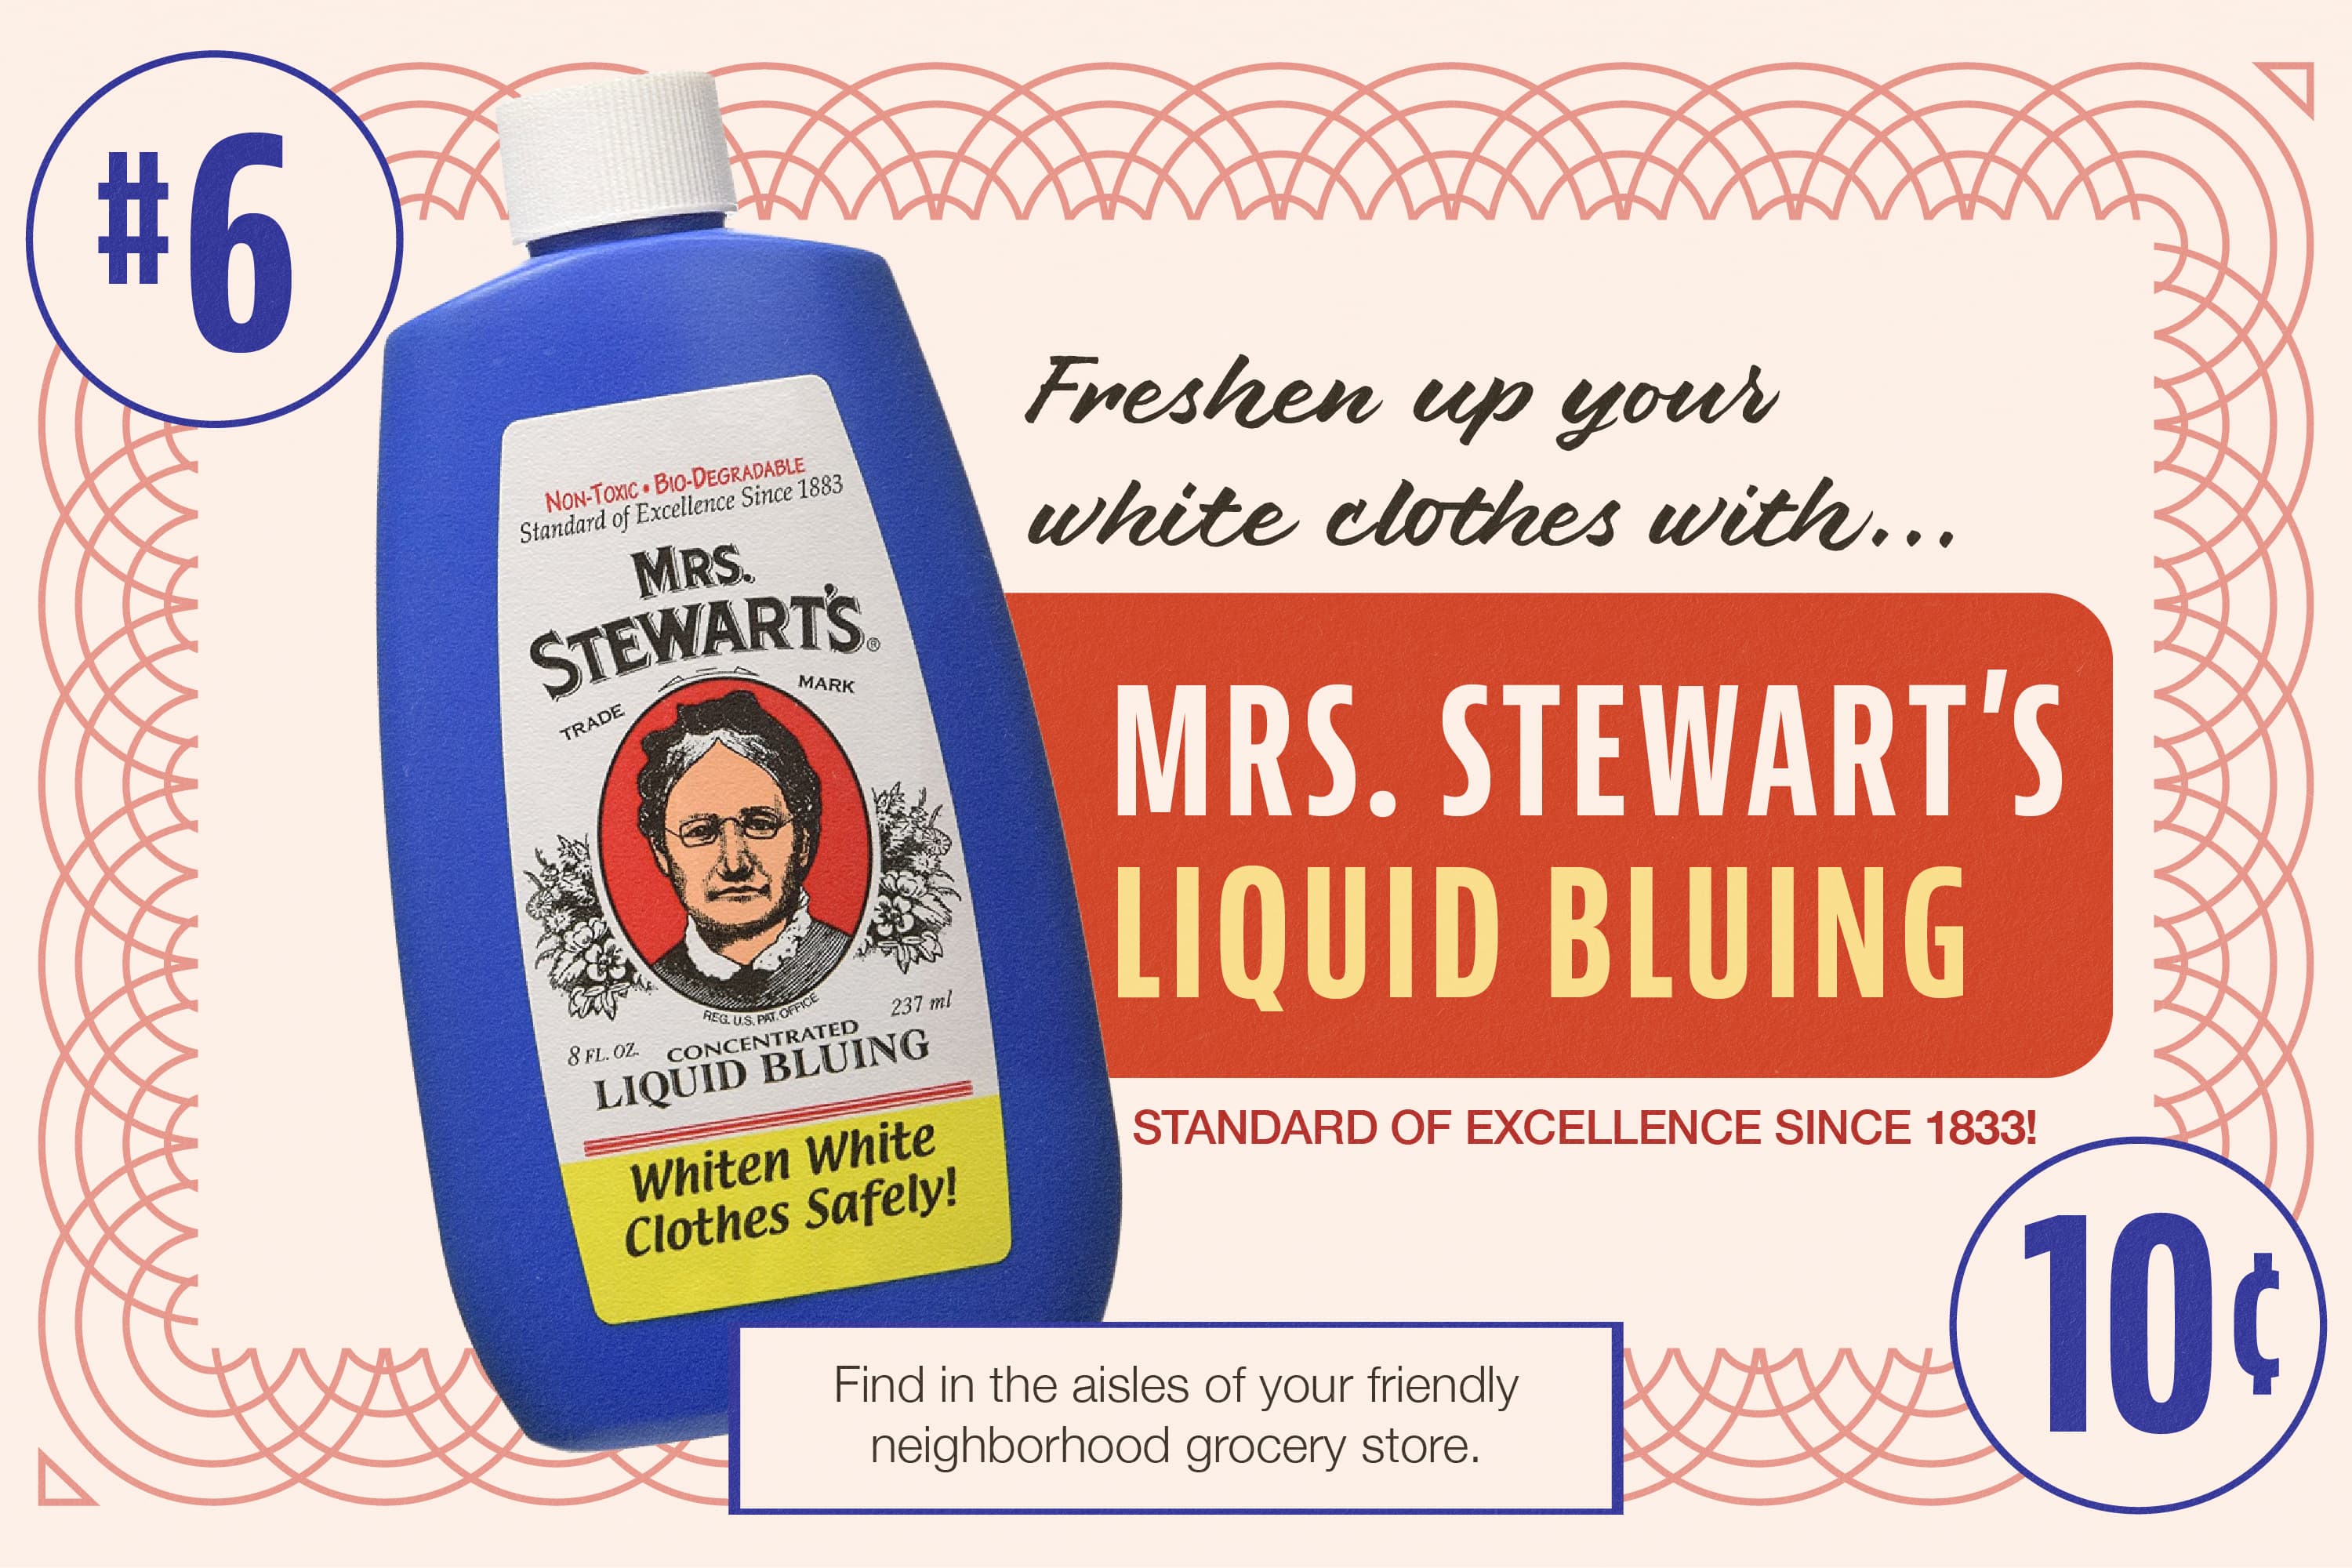 https://cdn.apartmenttherapy.info/image/upload/v1604010568/at/art/design/2020-10/old-fashioned-cleaning-products/6-mrs-stewart.jpg